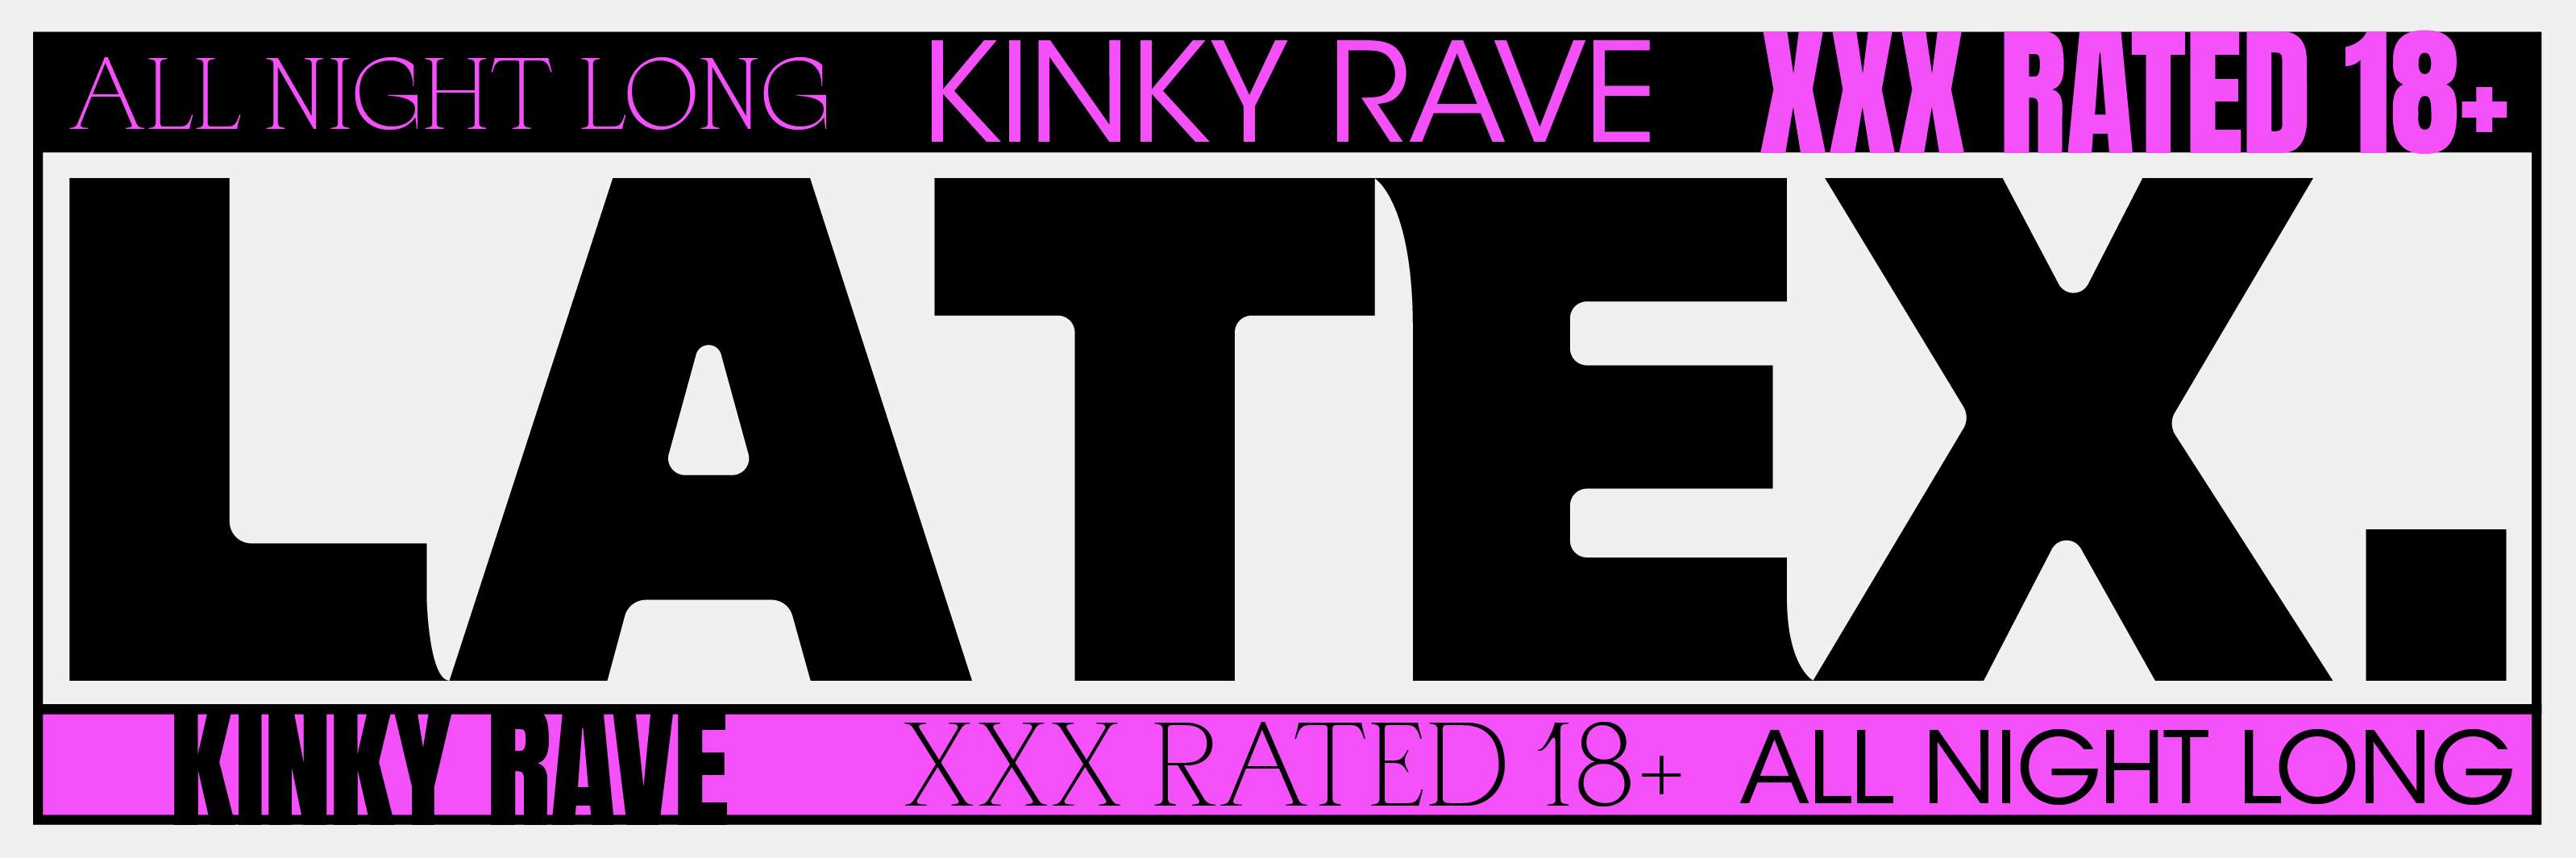 LATEX. // ALL NIGHT LONG // THE KINK IS NOT DEAD - Página frontal